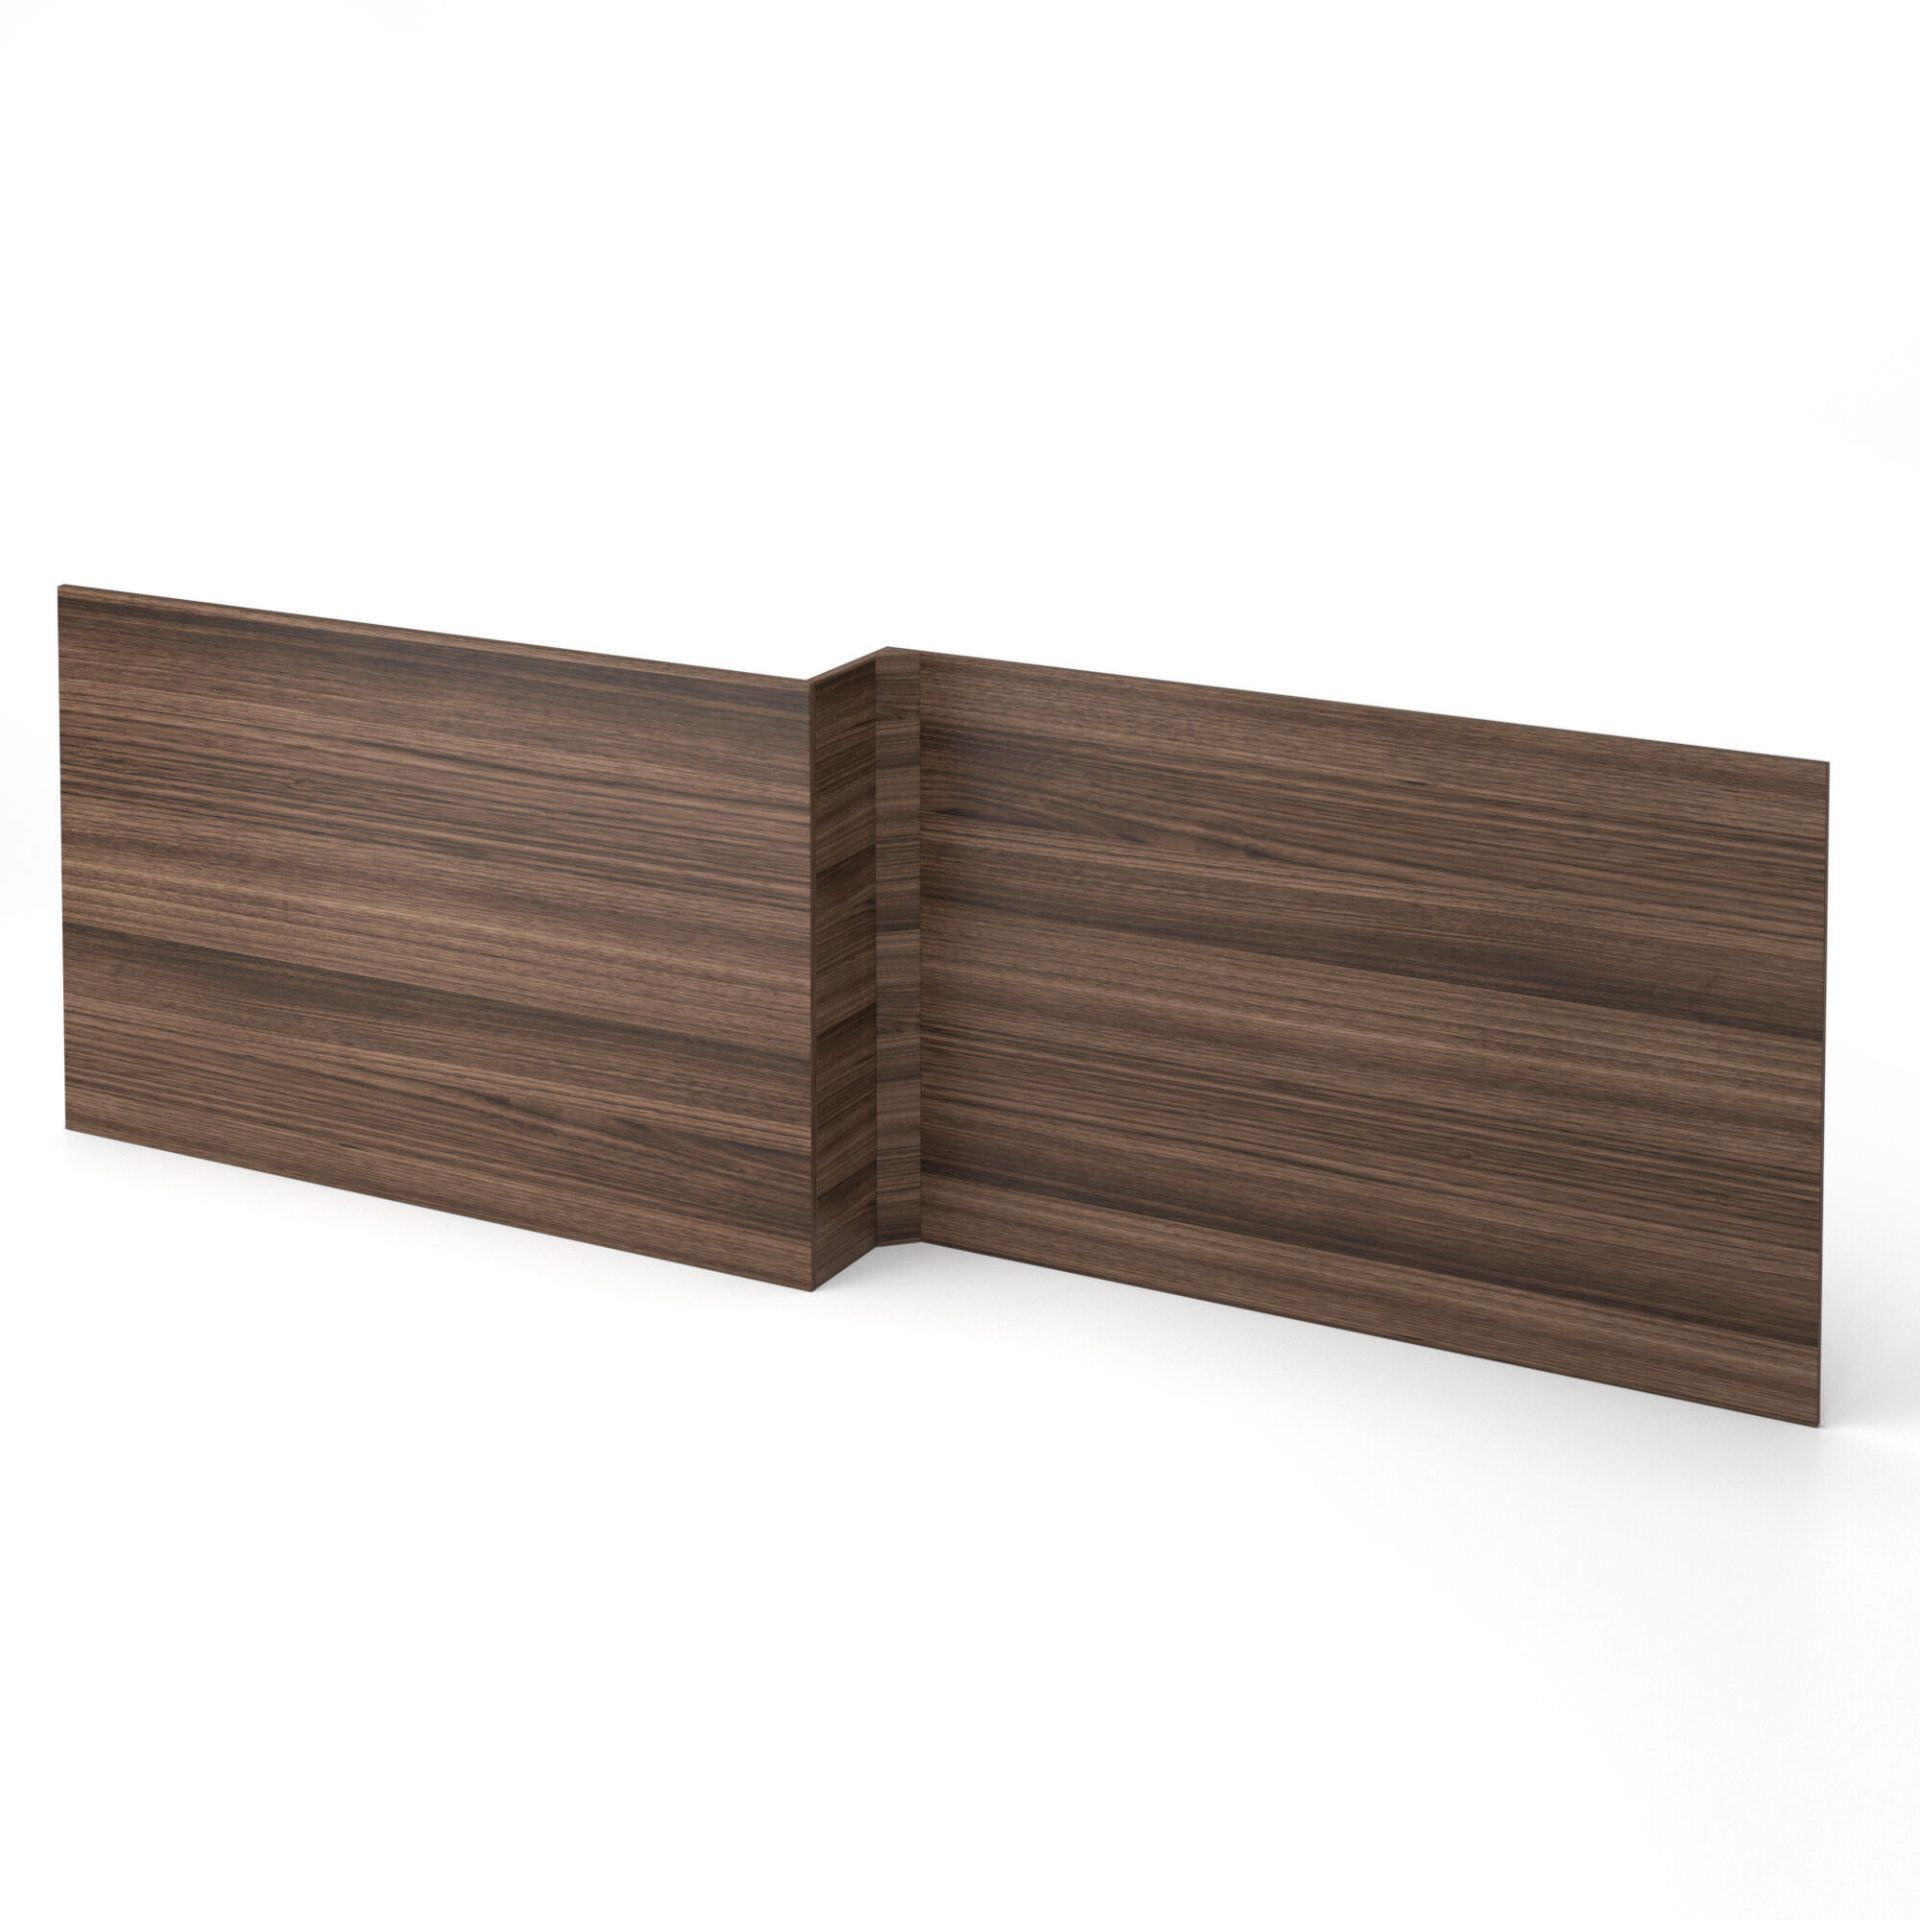 (PM73) 1700mm L-Shaped Bath Front Panel - Walnut Effect. RRP £73.99. Engineered with everyda...